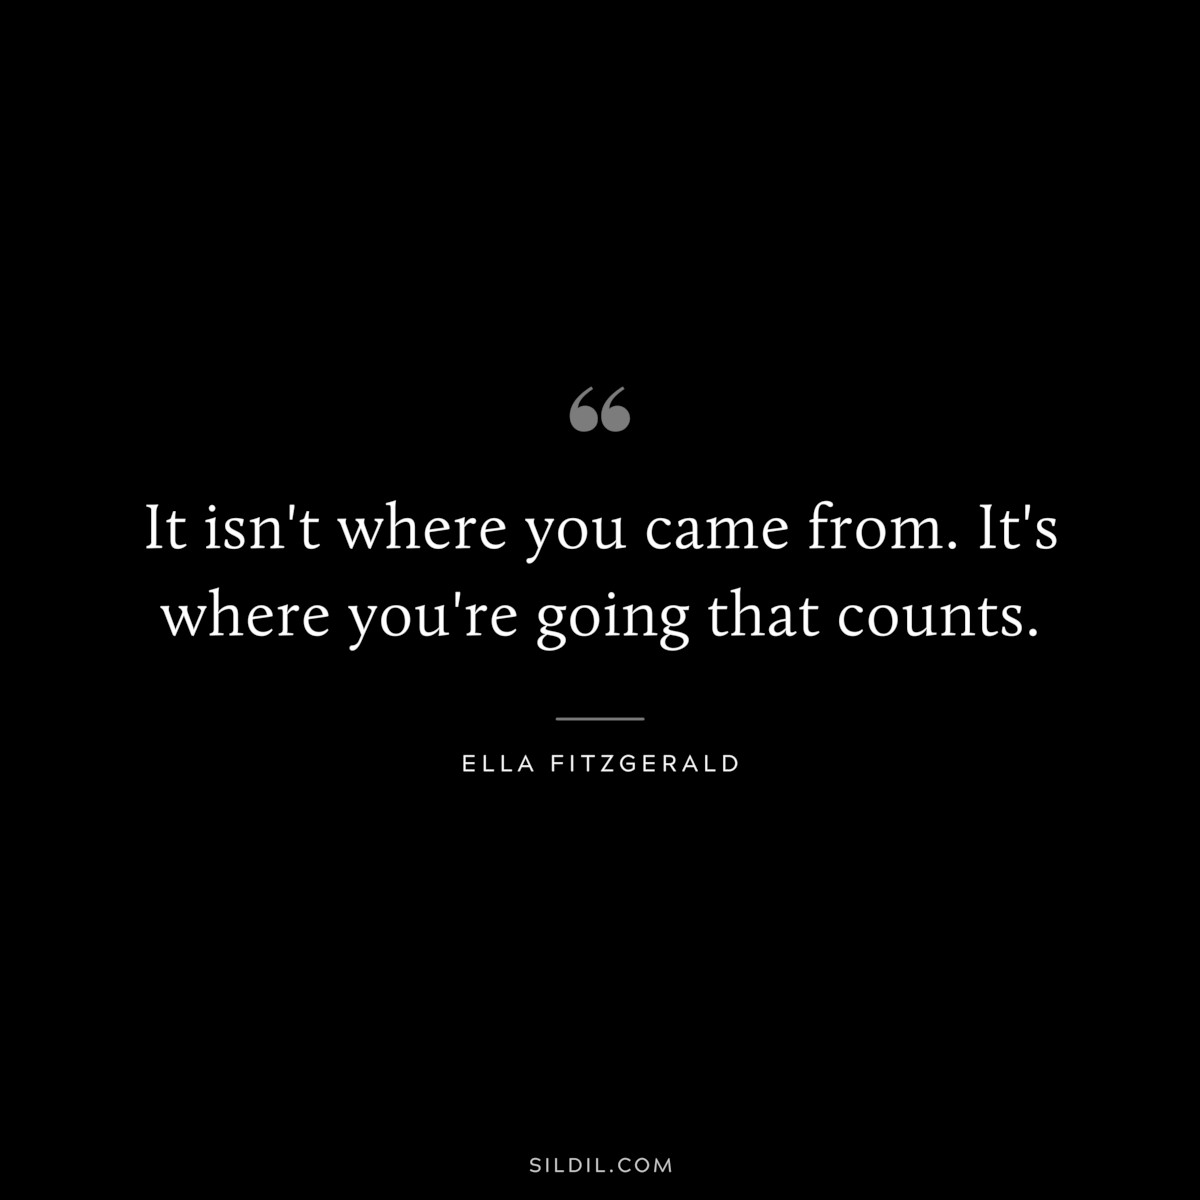 It isn't where you came from. It's where you're going that counts. ― Ella Fitzgerald